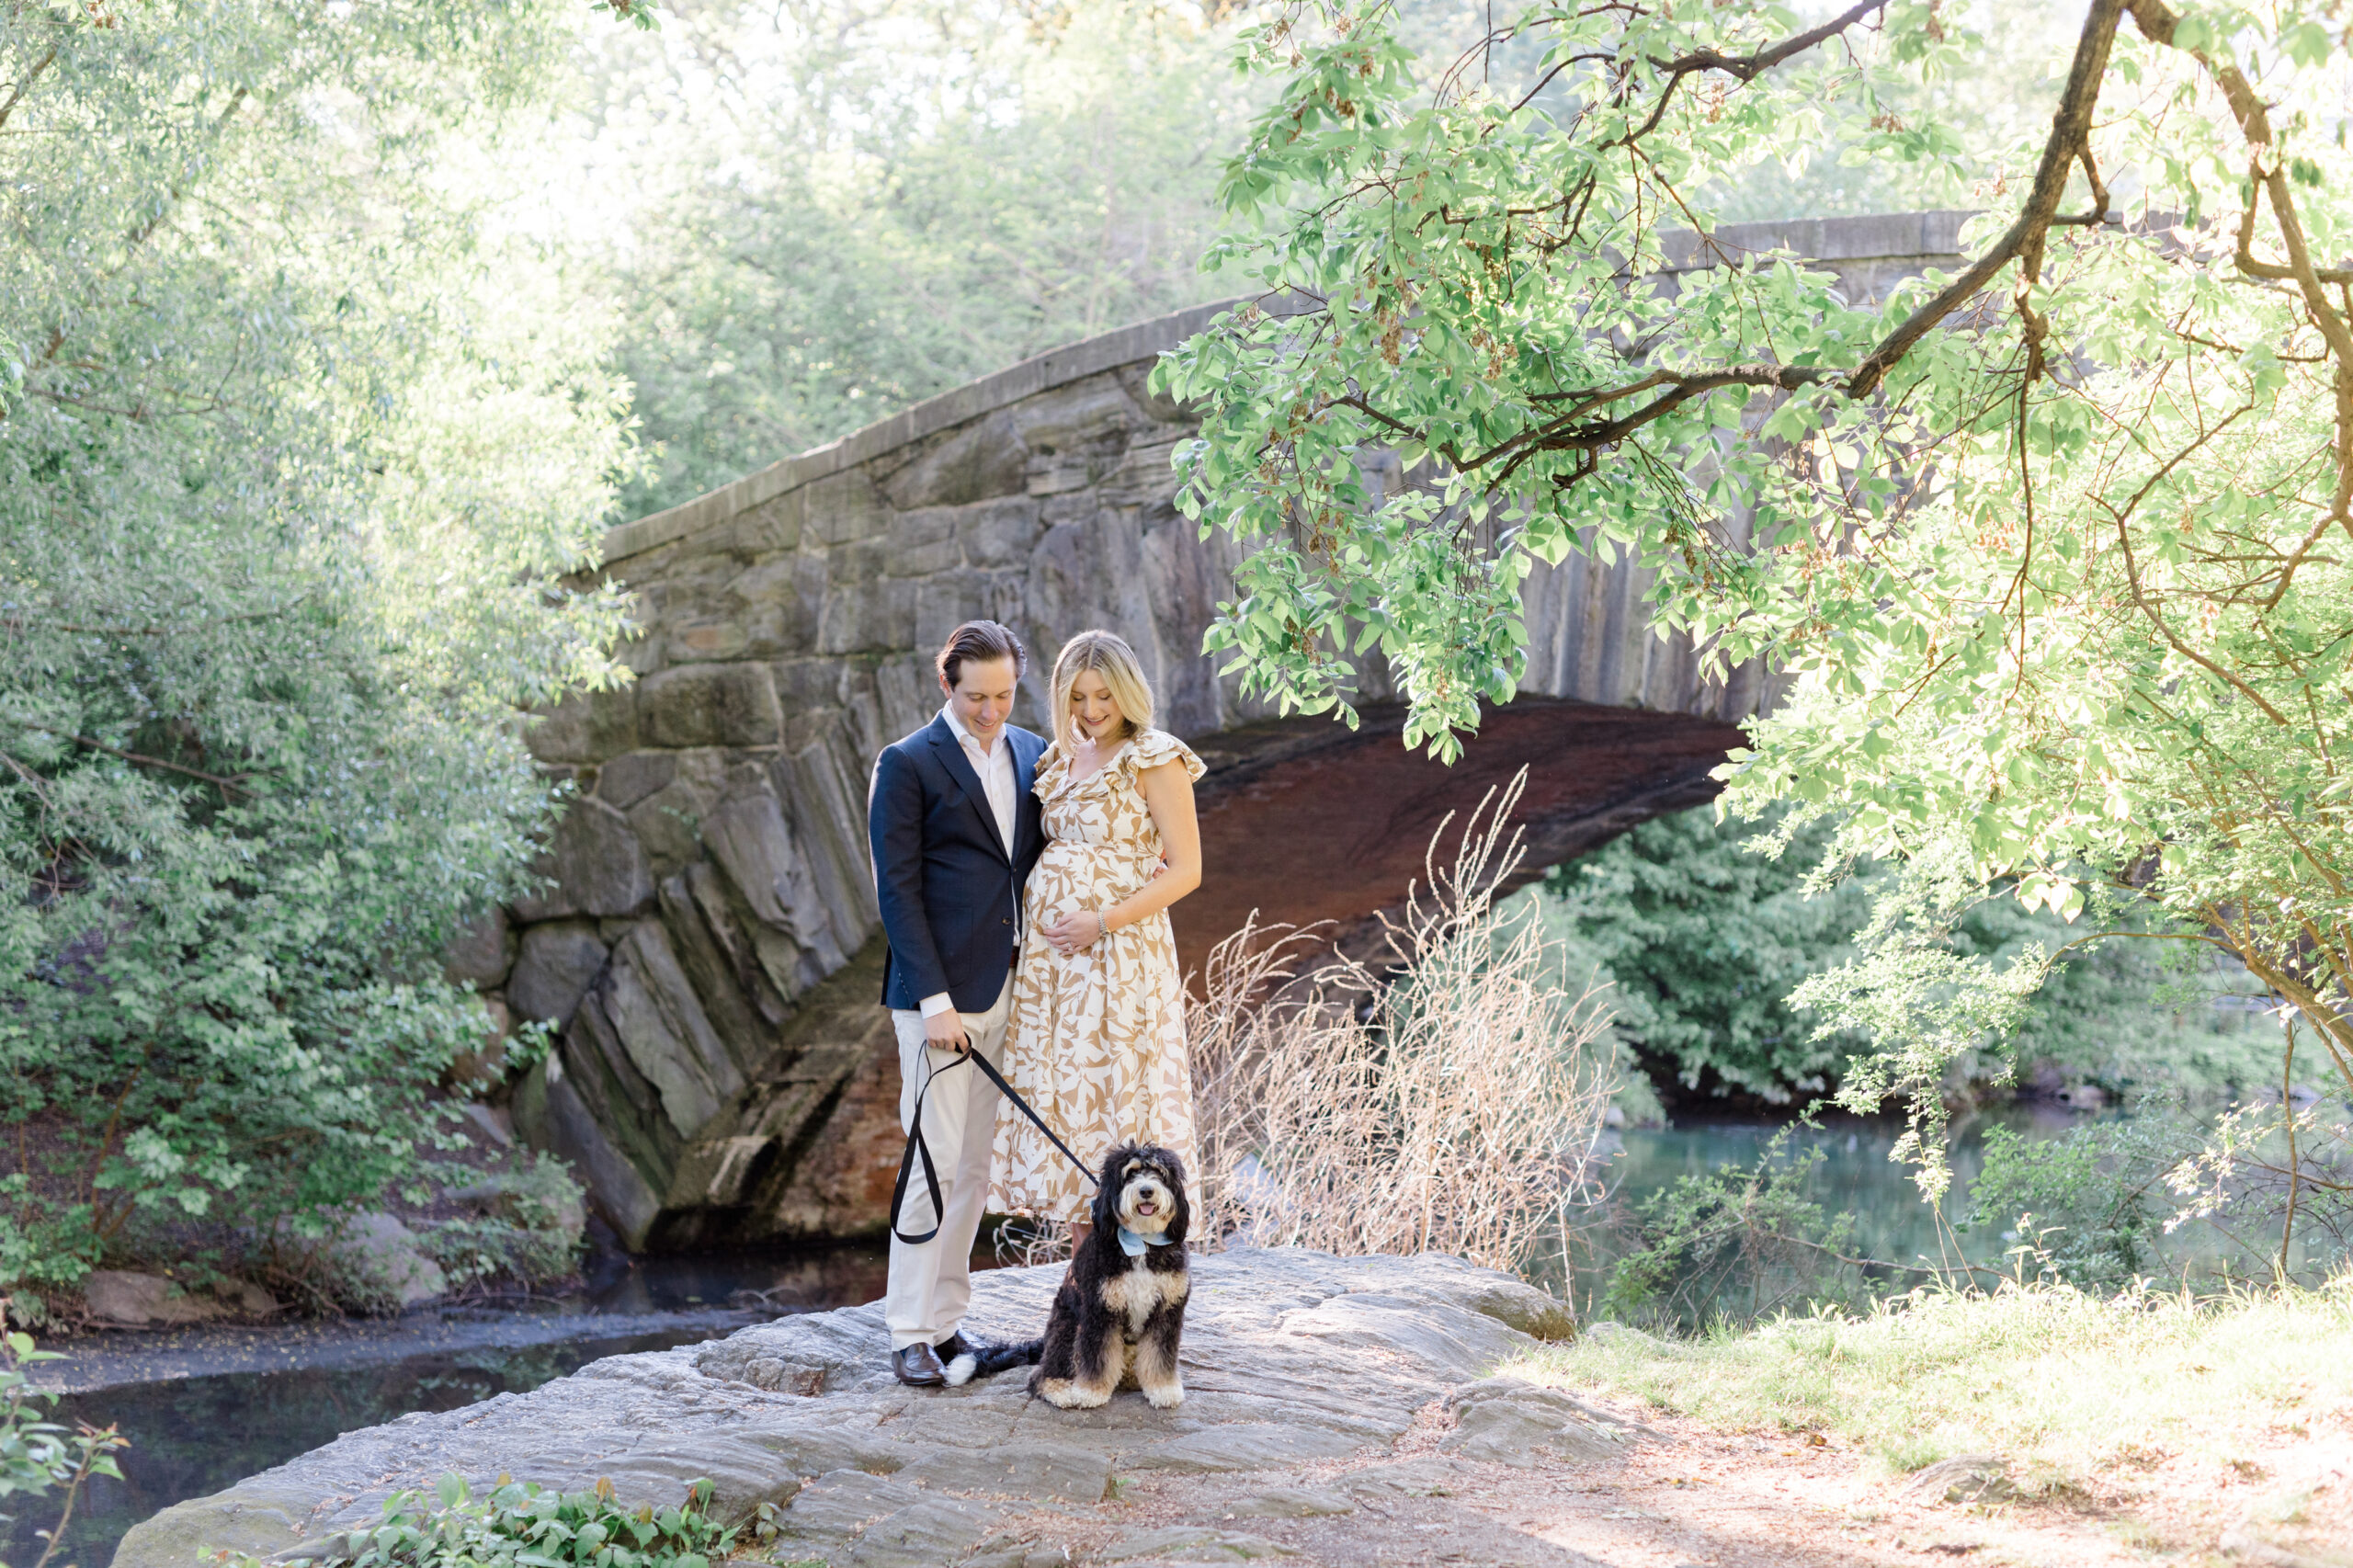 An expecting mom and her husband in front of Gapstow Bridge with their dog at a maternity photo session in Central Park shot by Jacqueline Clair Photography